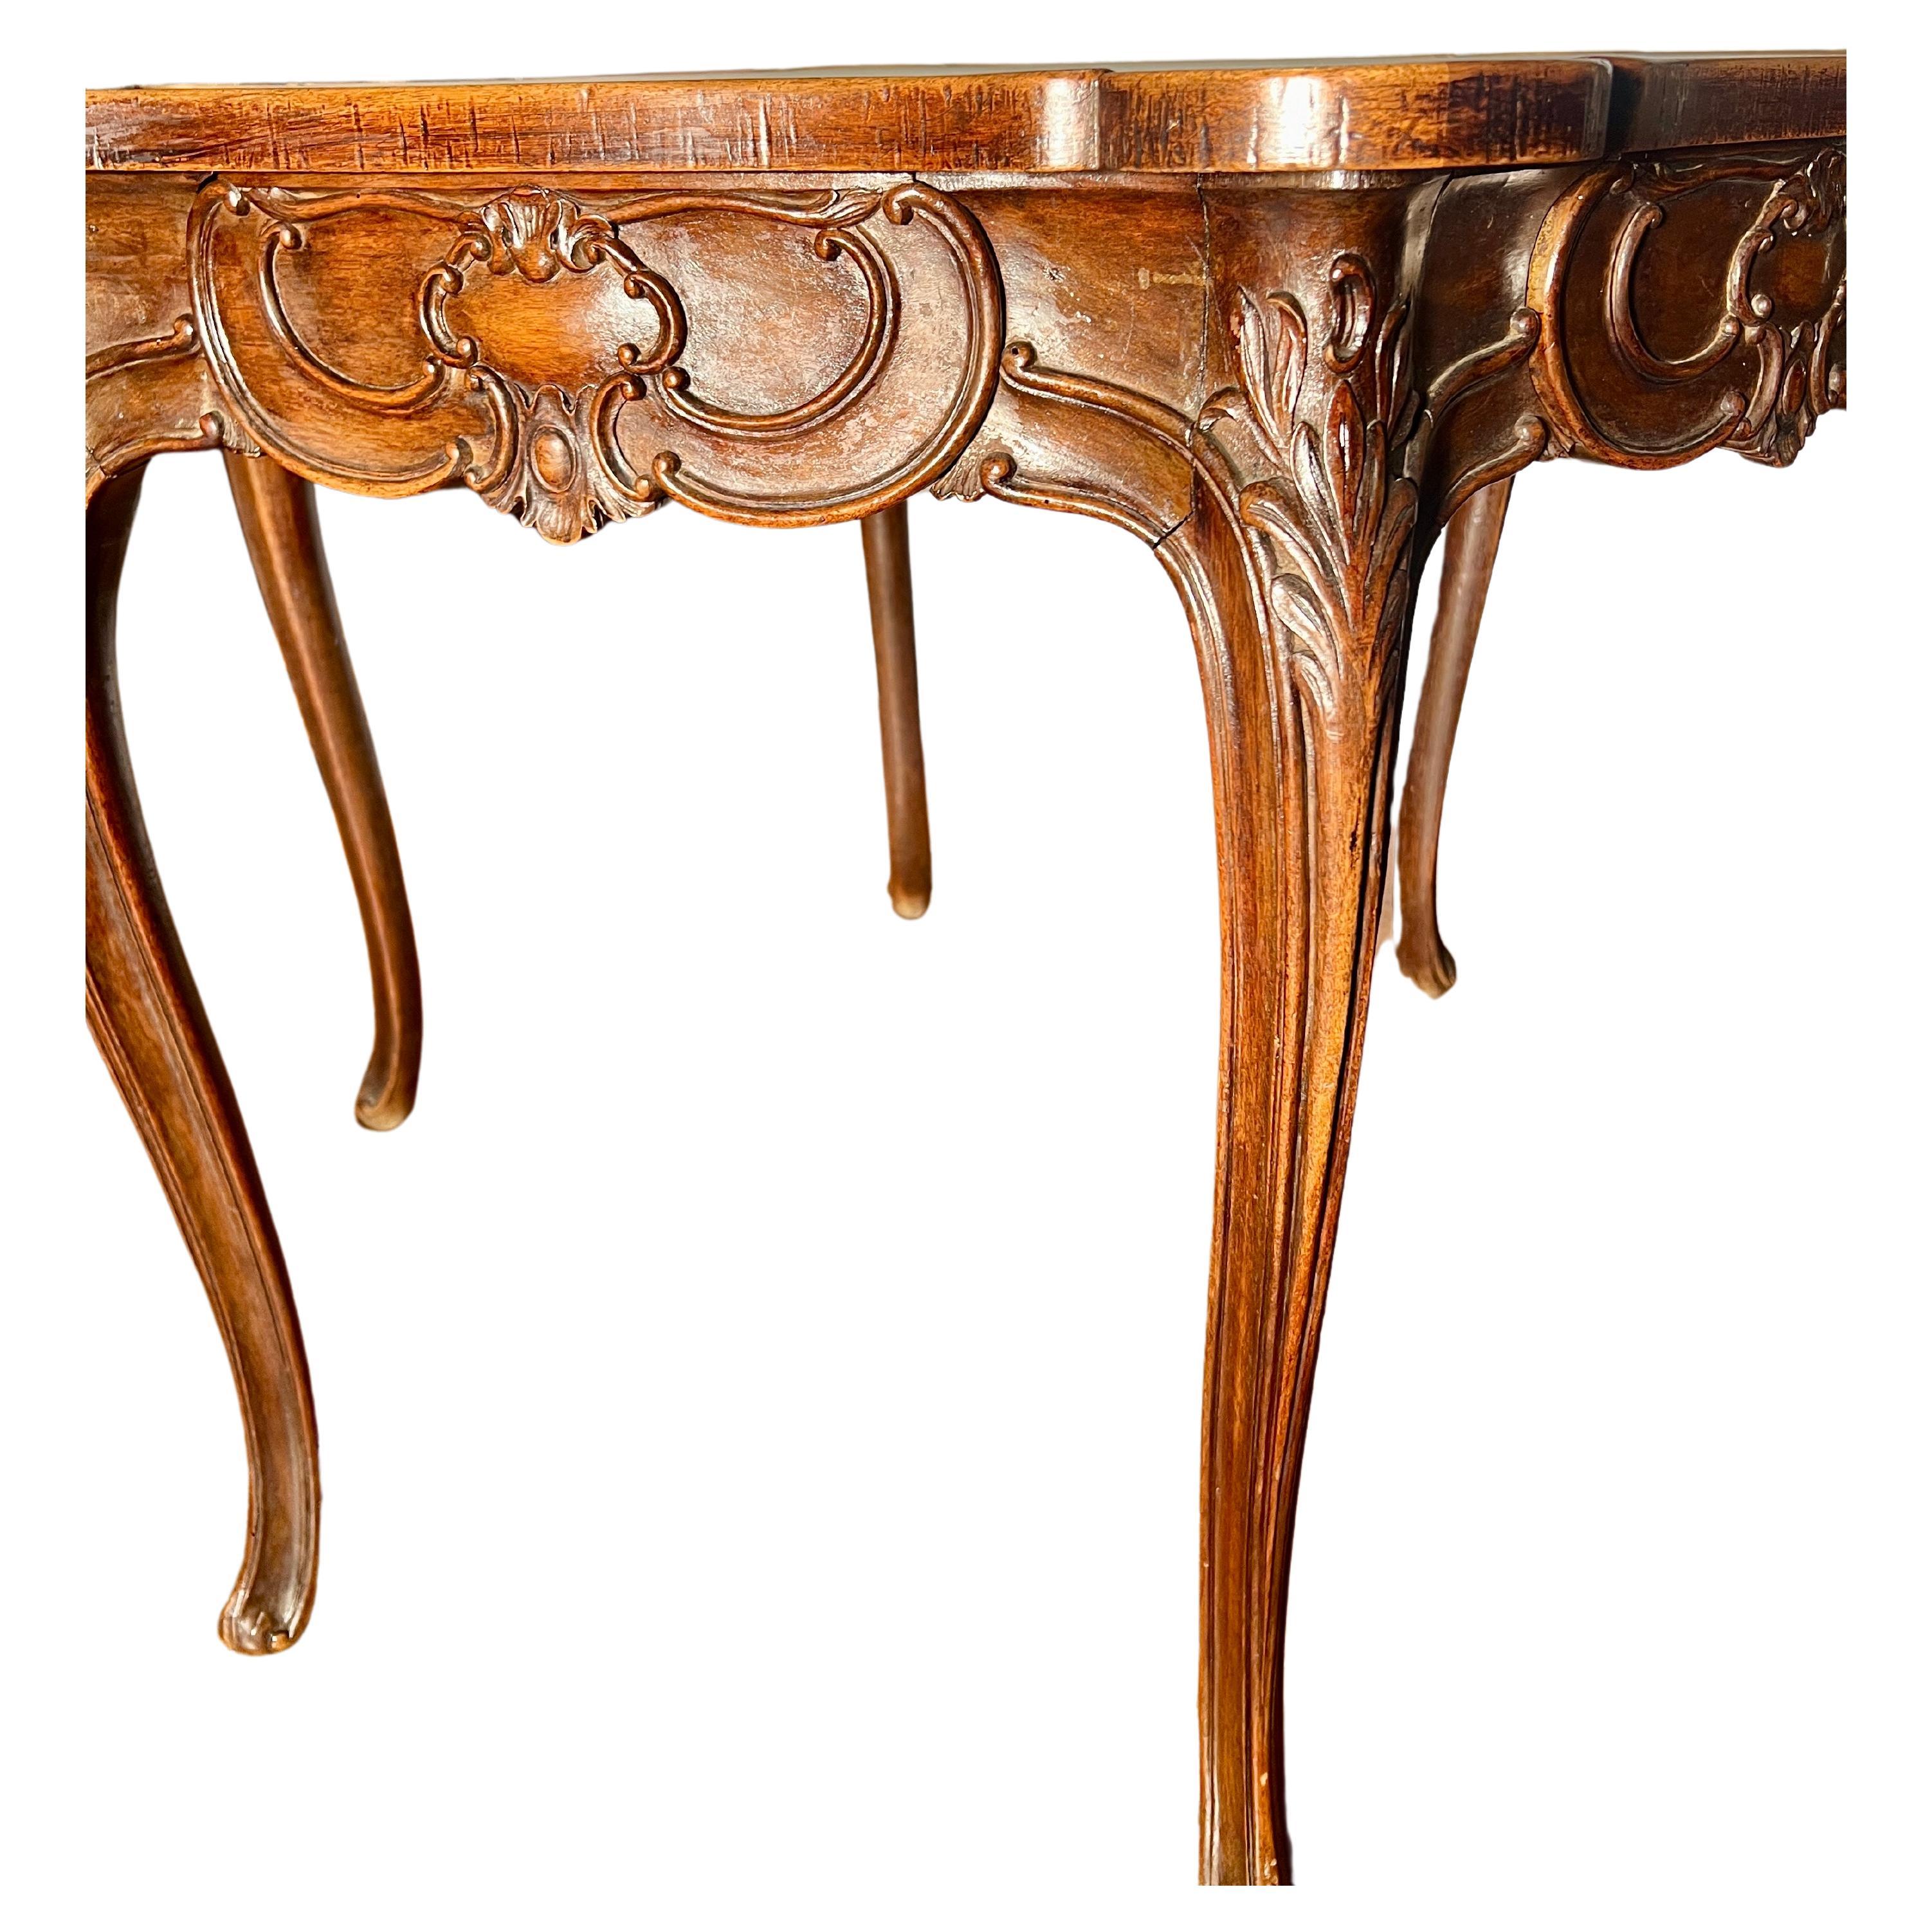 19th Century Antique French Carved Walnut Games Table, Circa 1885-1895. For Sale